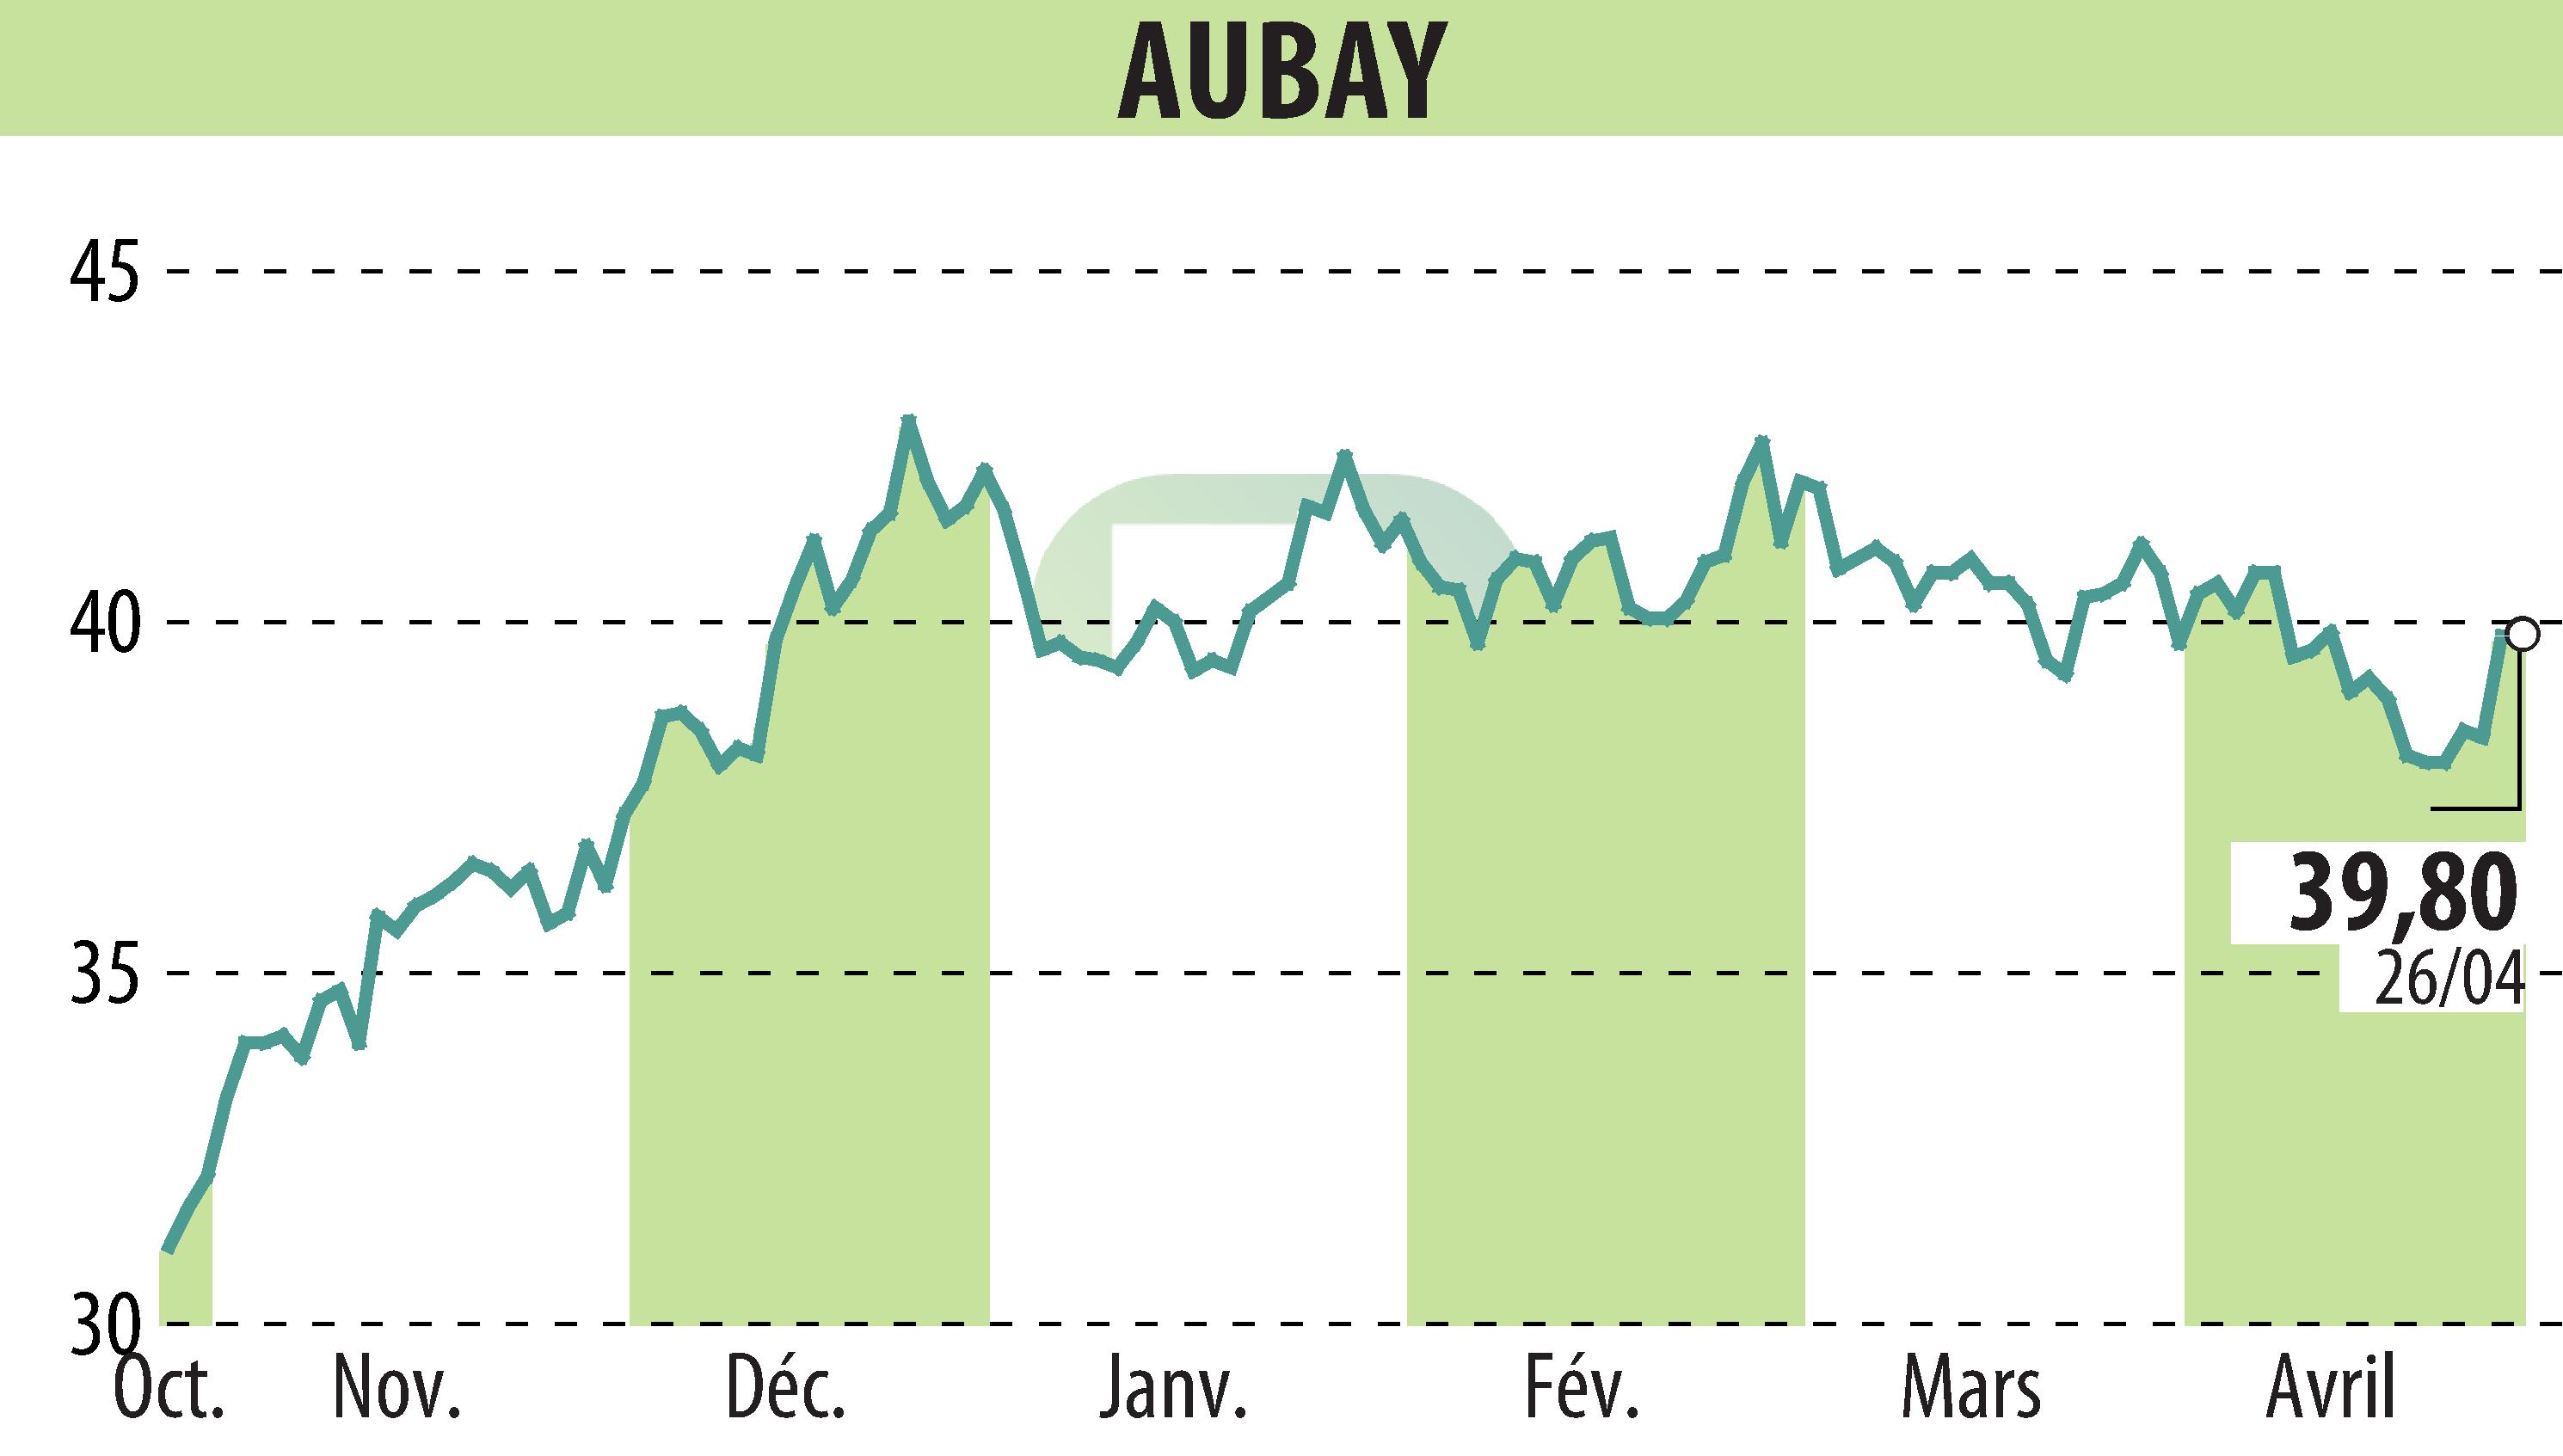 Stock price chart of AUBAY (EPA:AUB) showing fluctuations.